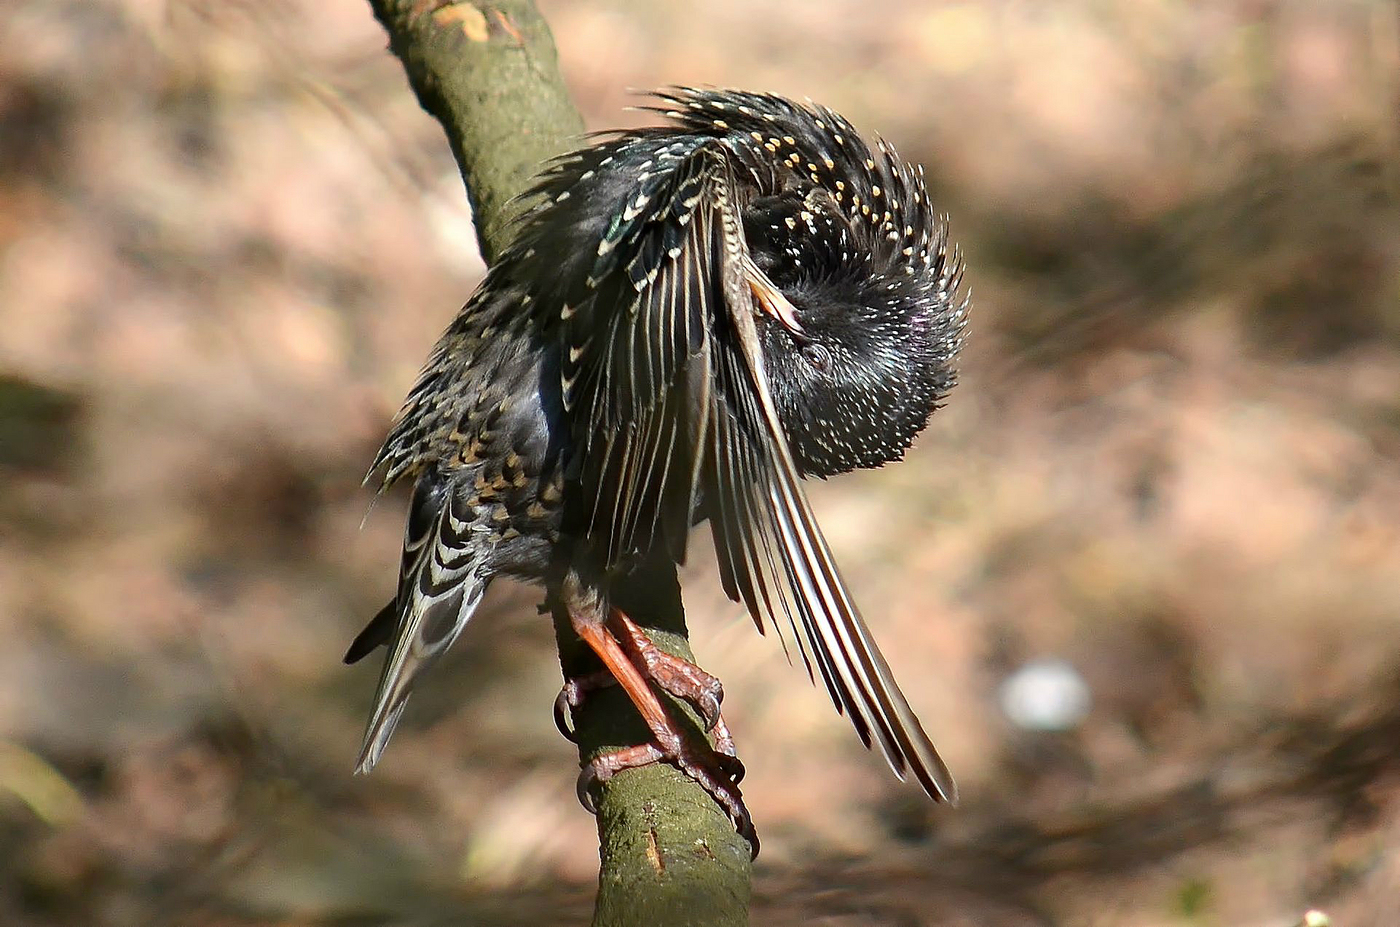 Starling cleans feathers